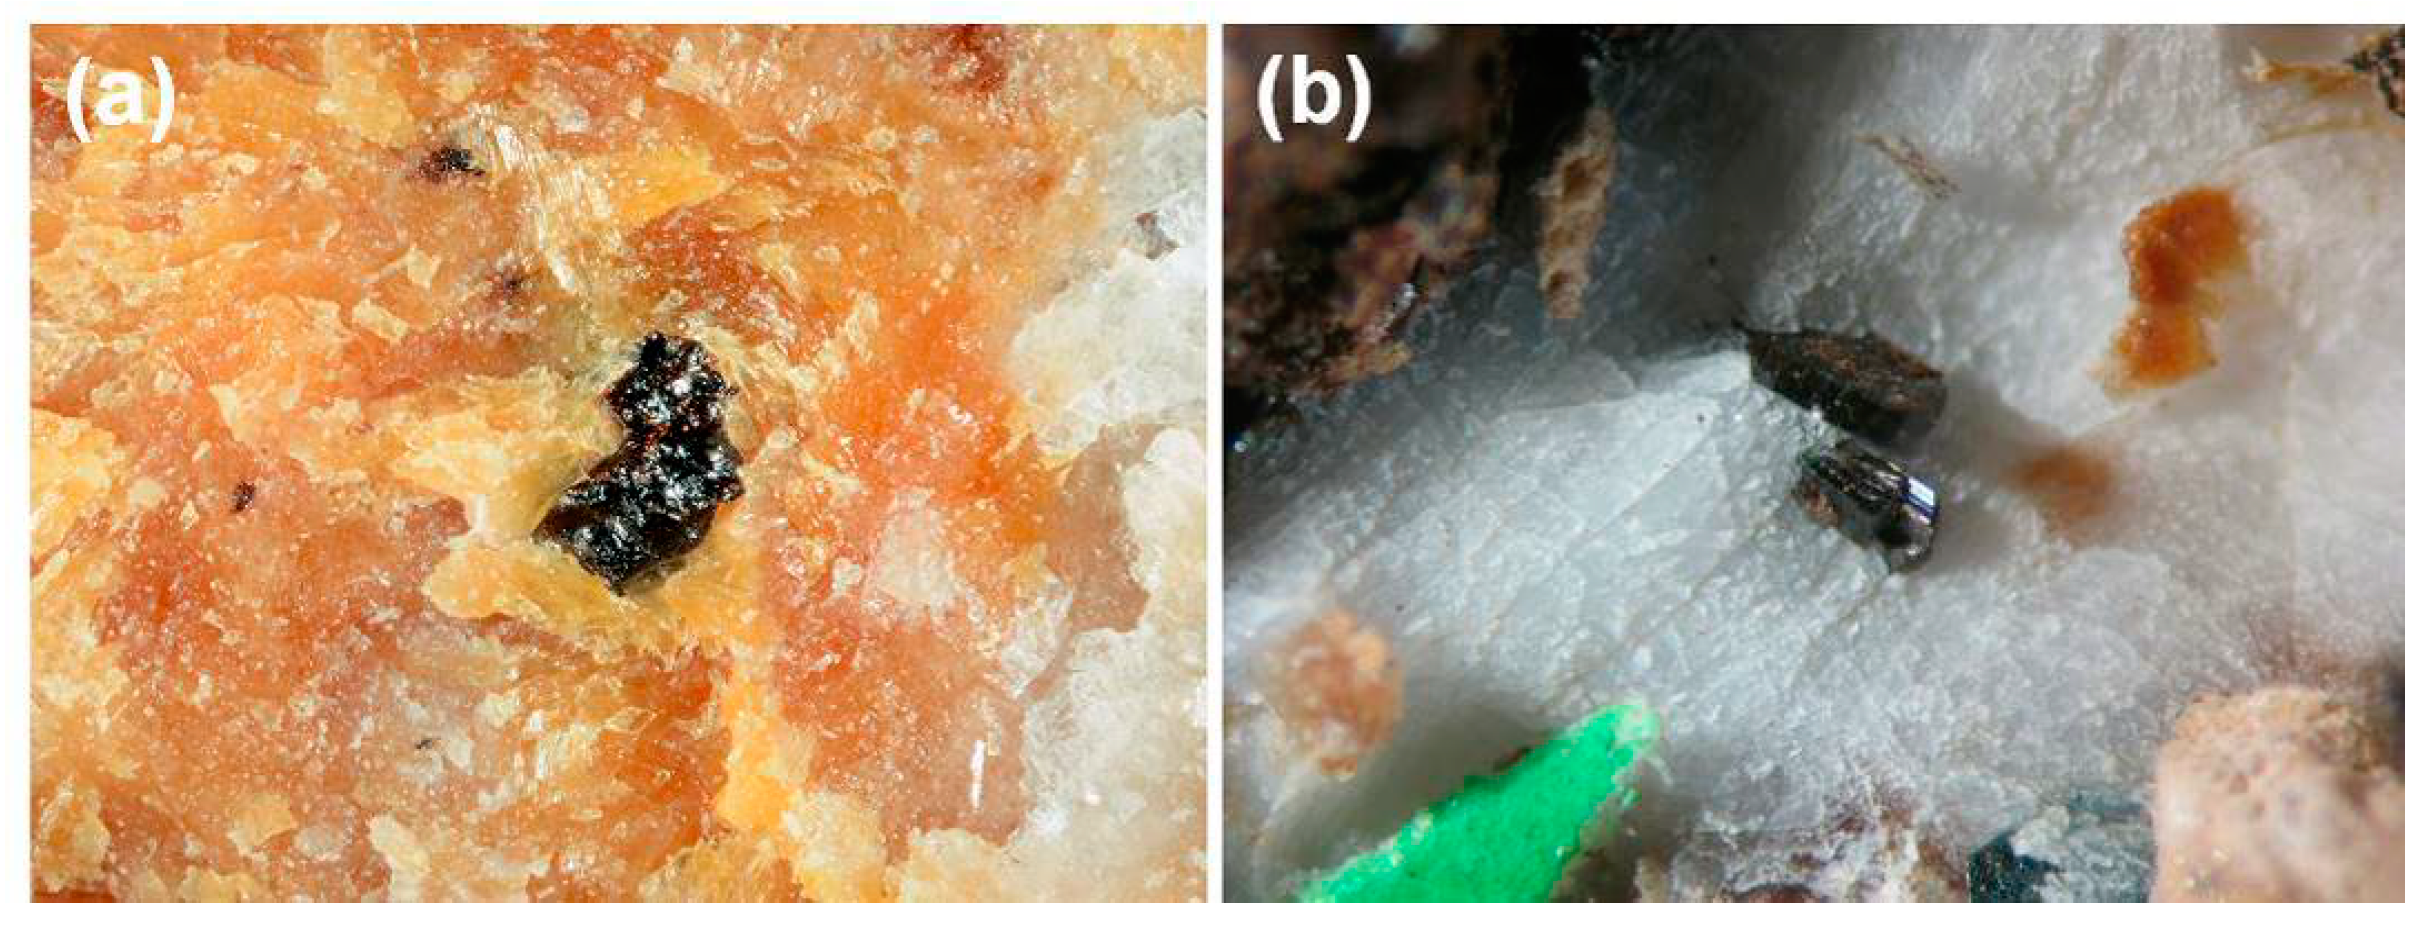 Allanite Group: Mineral information, data and localities.